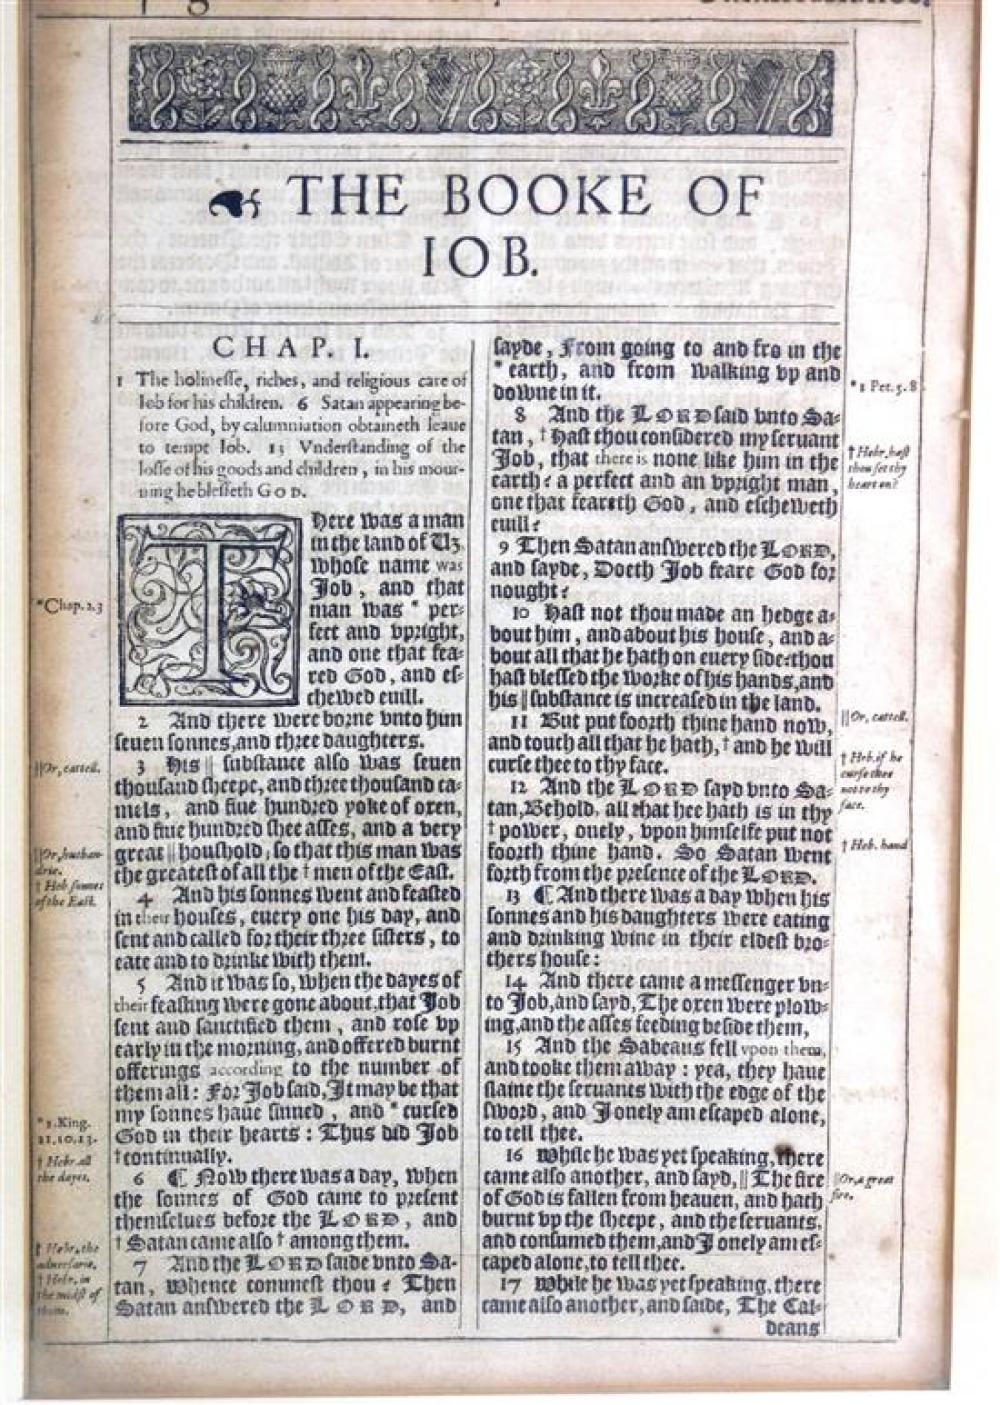 ORIGINAL LEAF FROM THE 1611 EDITION